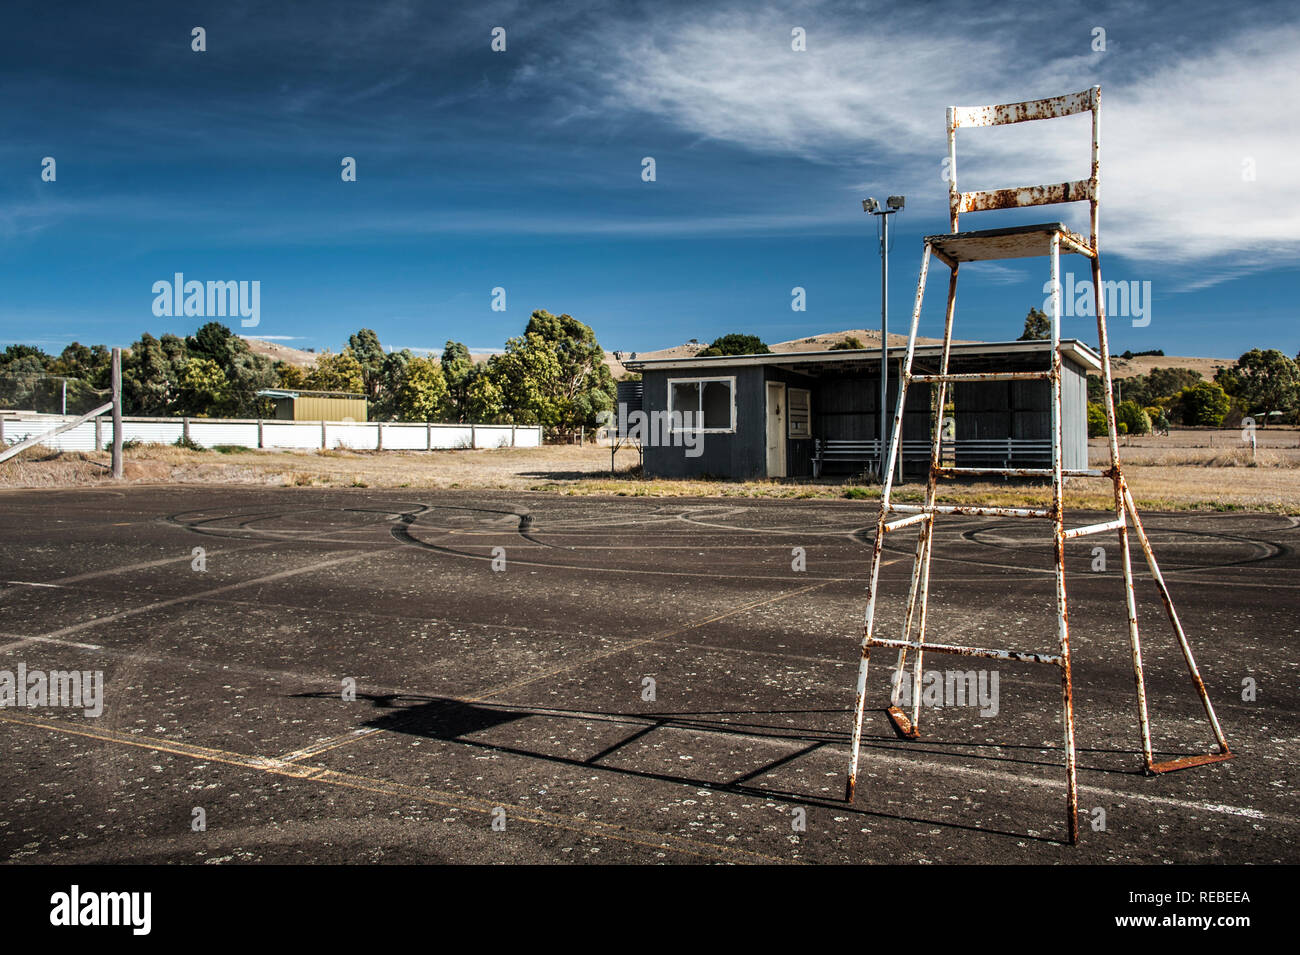 Umpires chair and shed in an abandoned tennis court in rural Victoria Australia Stock Photo